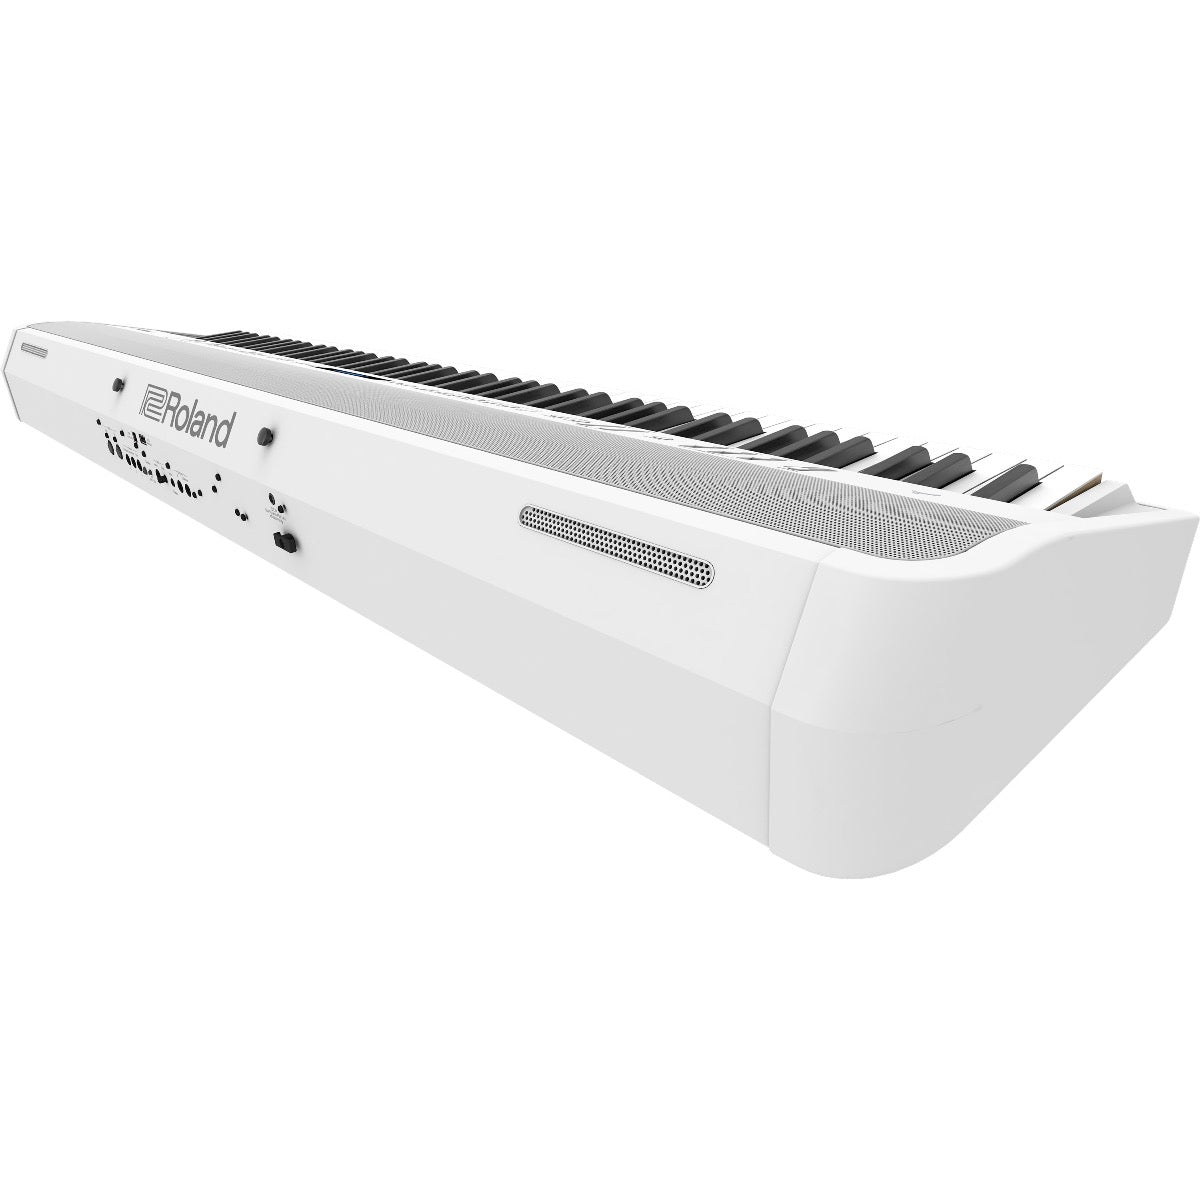 3/4 view of Roland FP-90X Digital Piano - White showing rear, top and left side